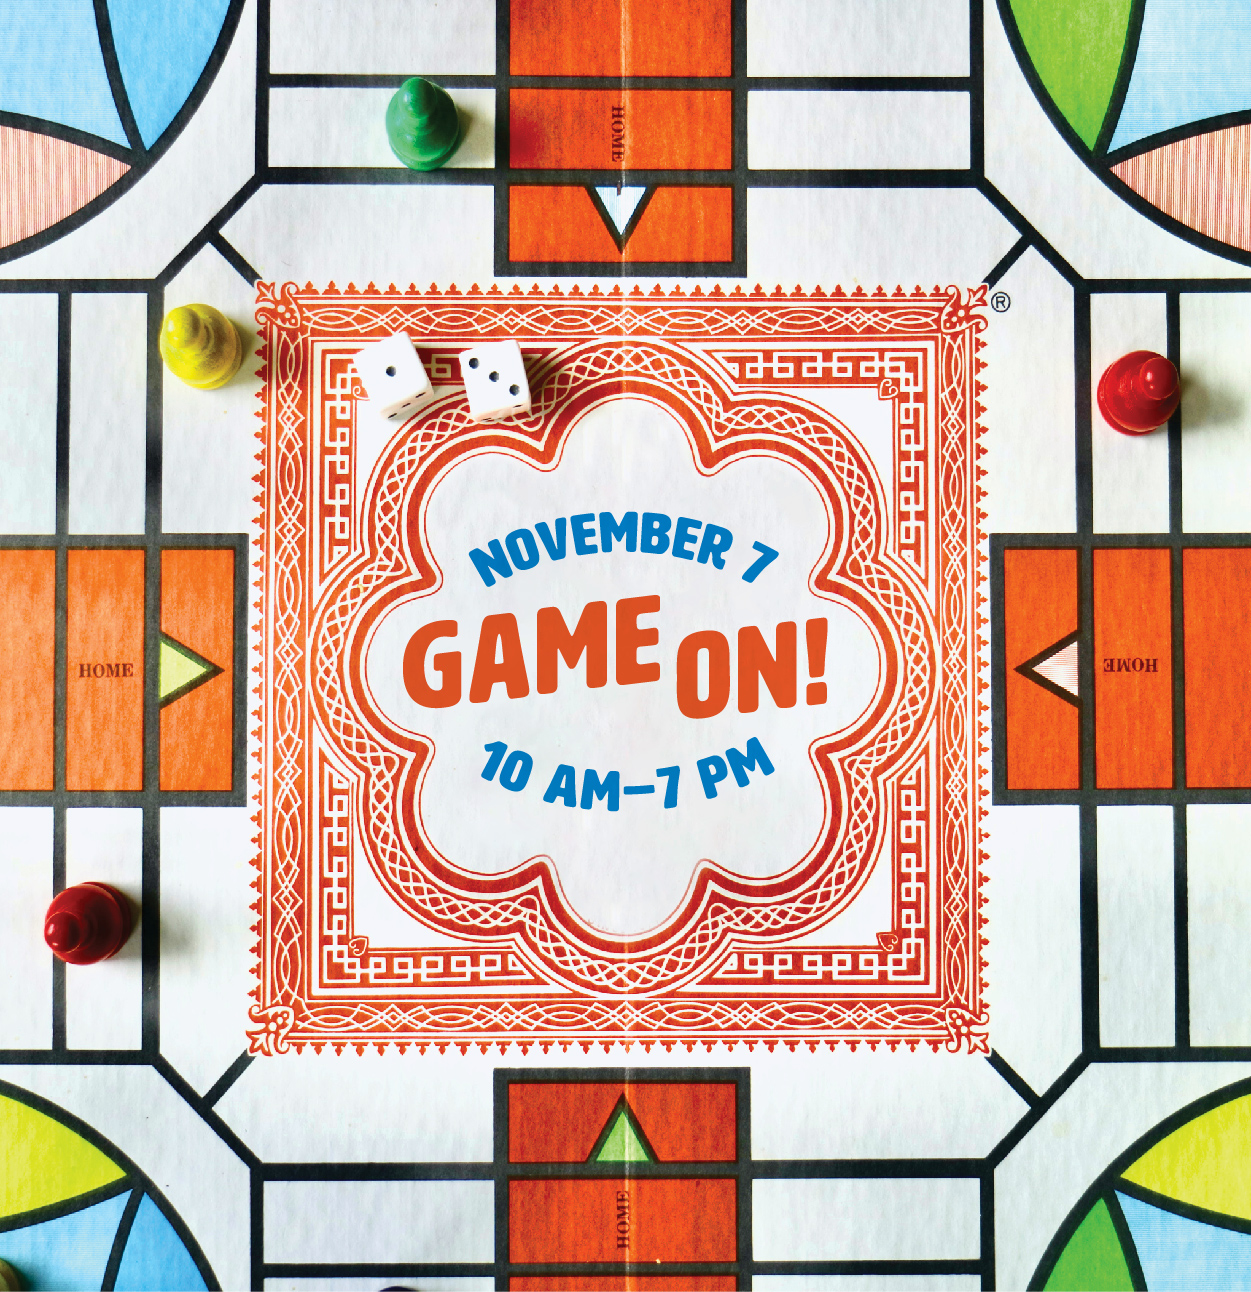 November 7 Game On! 10 am–7 pm